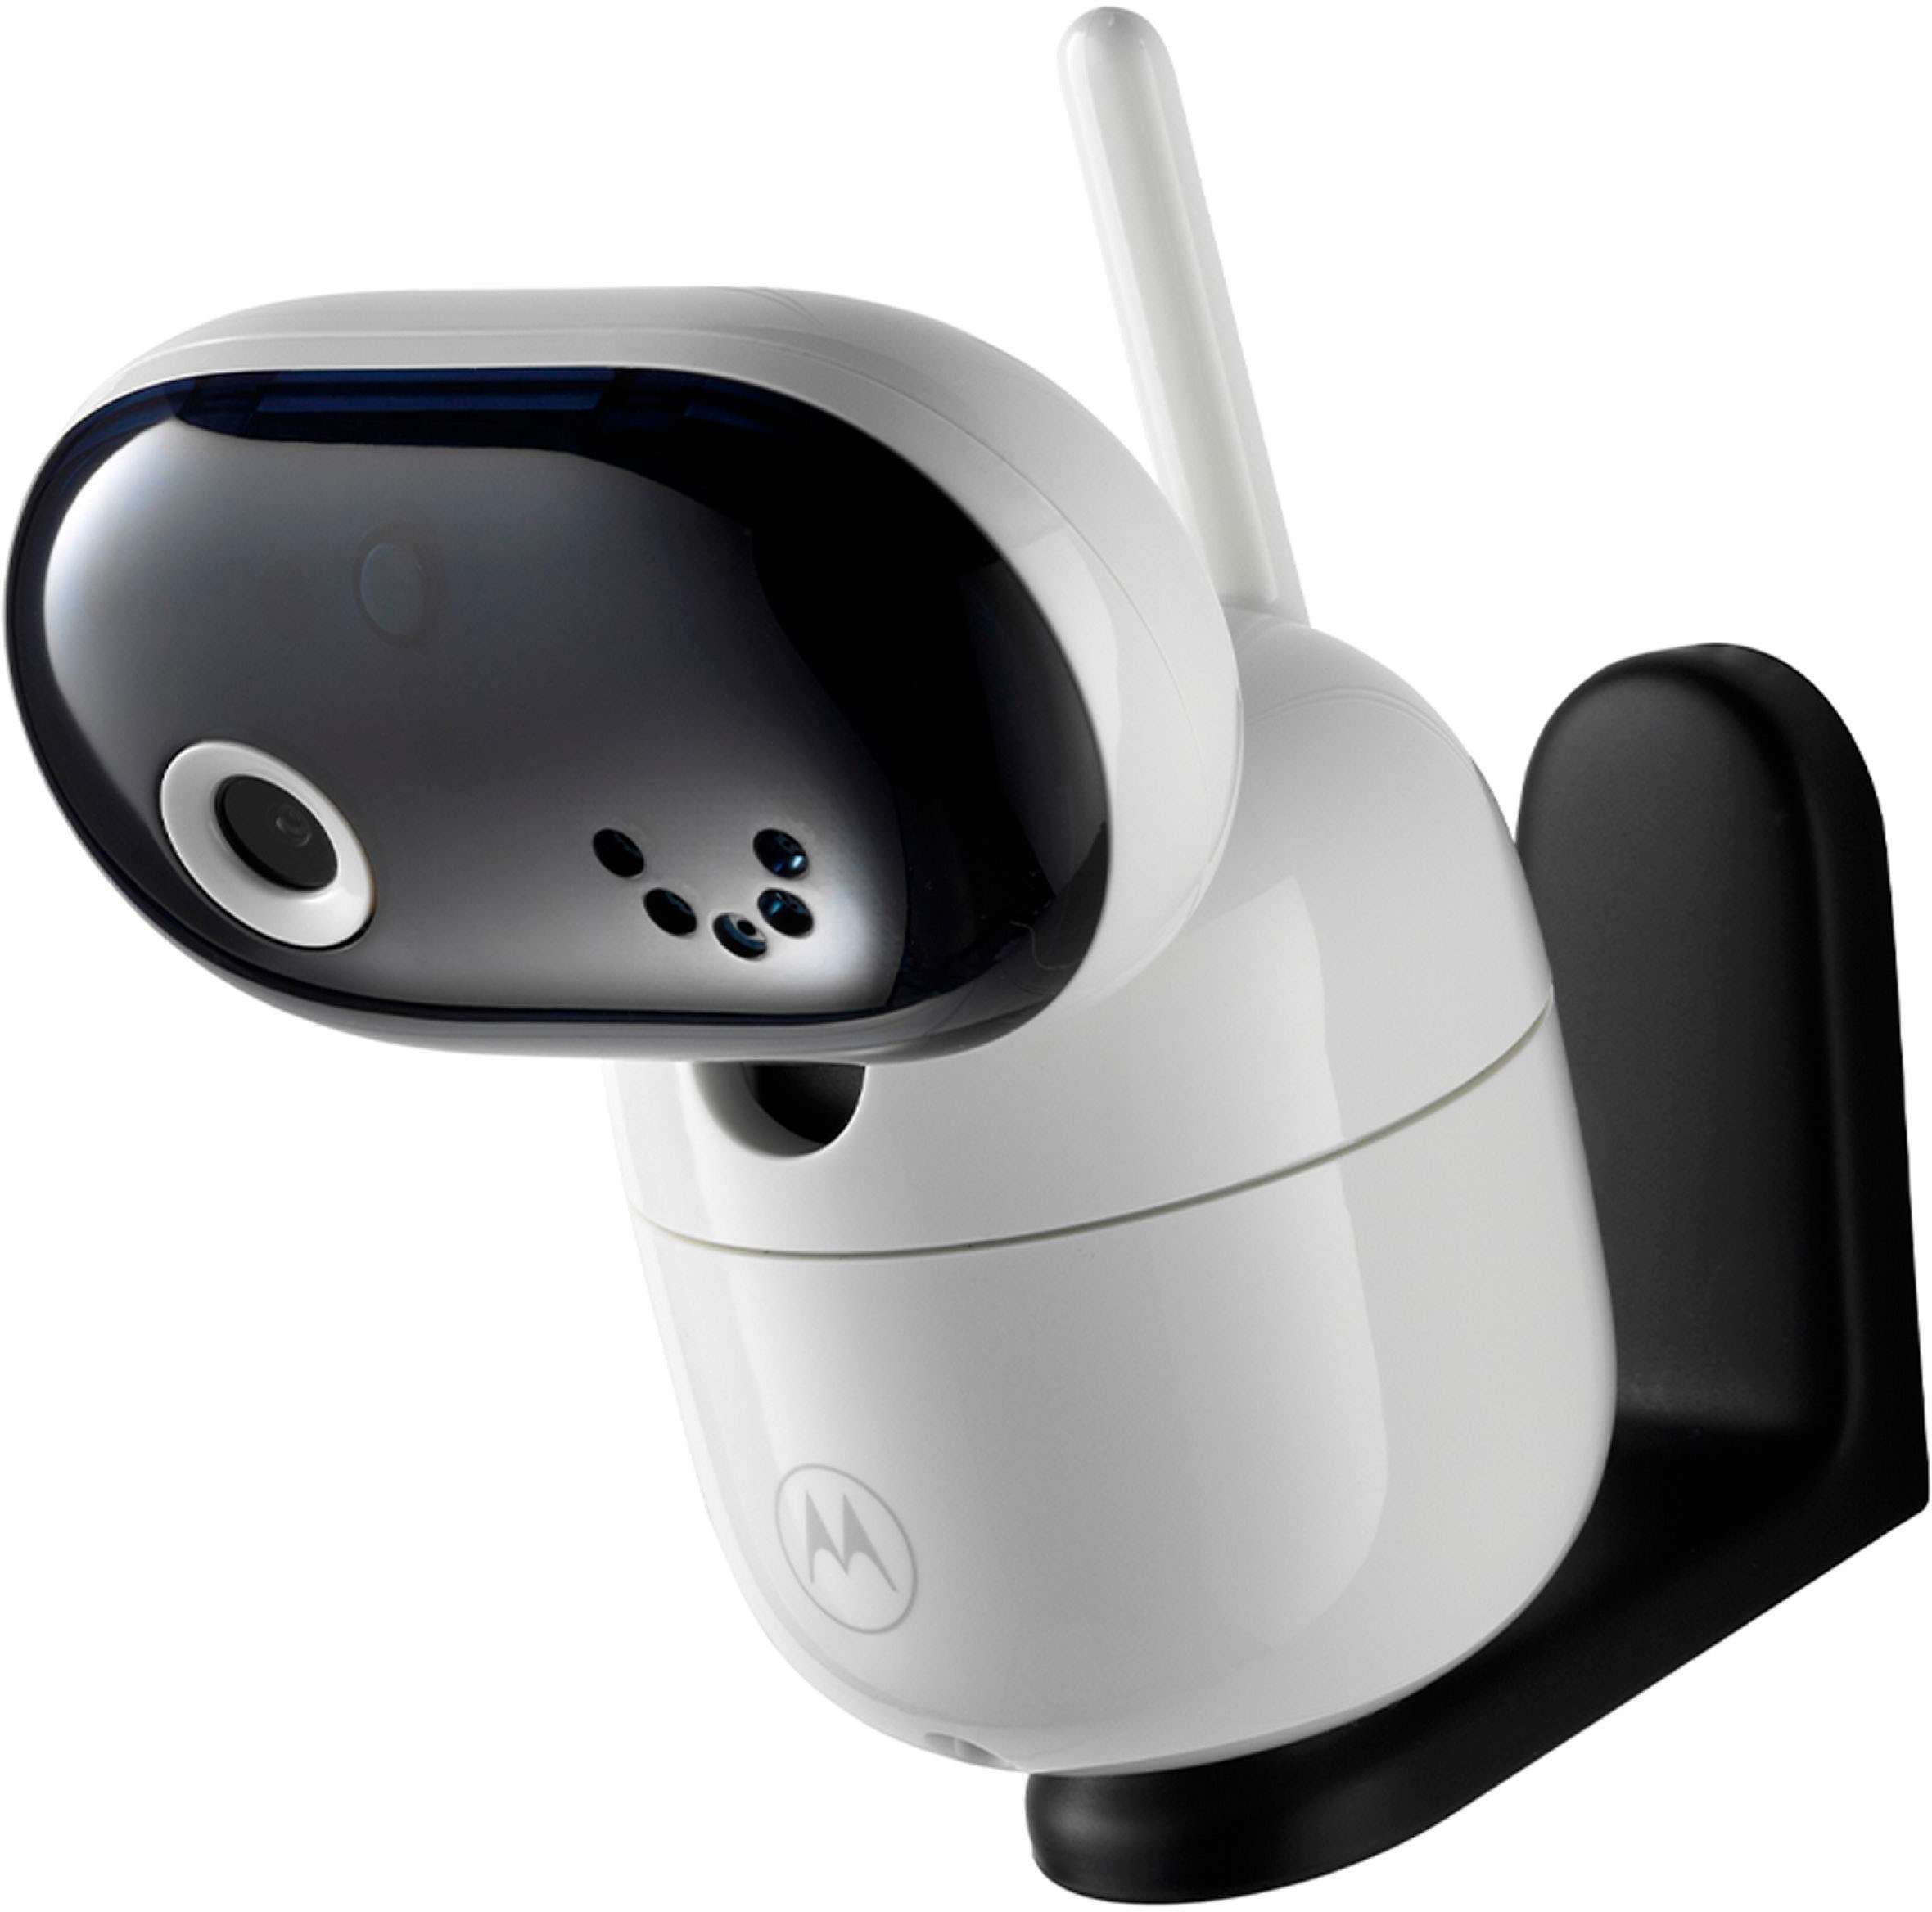 Motorola PIP1510 Connect video baby monitor review: Reliable, with